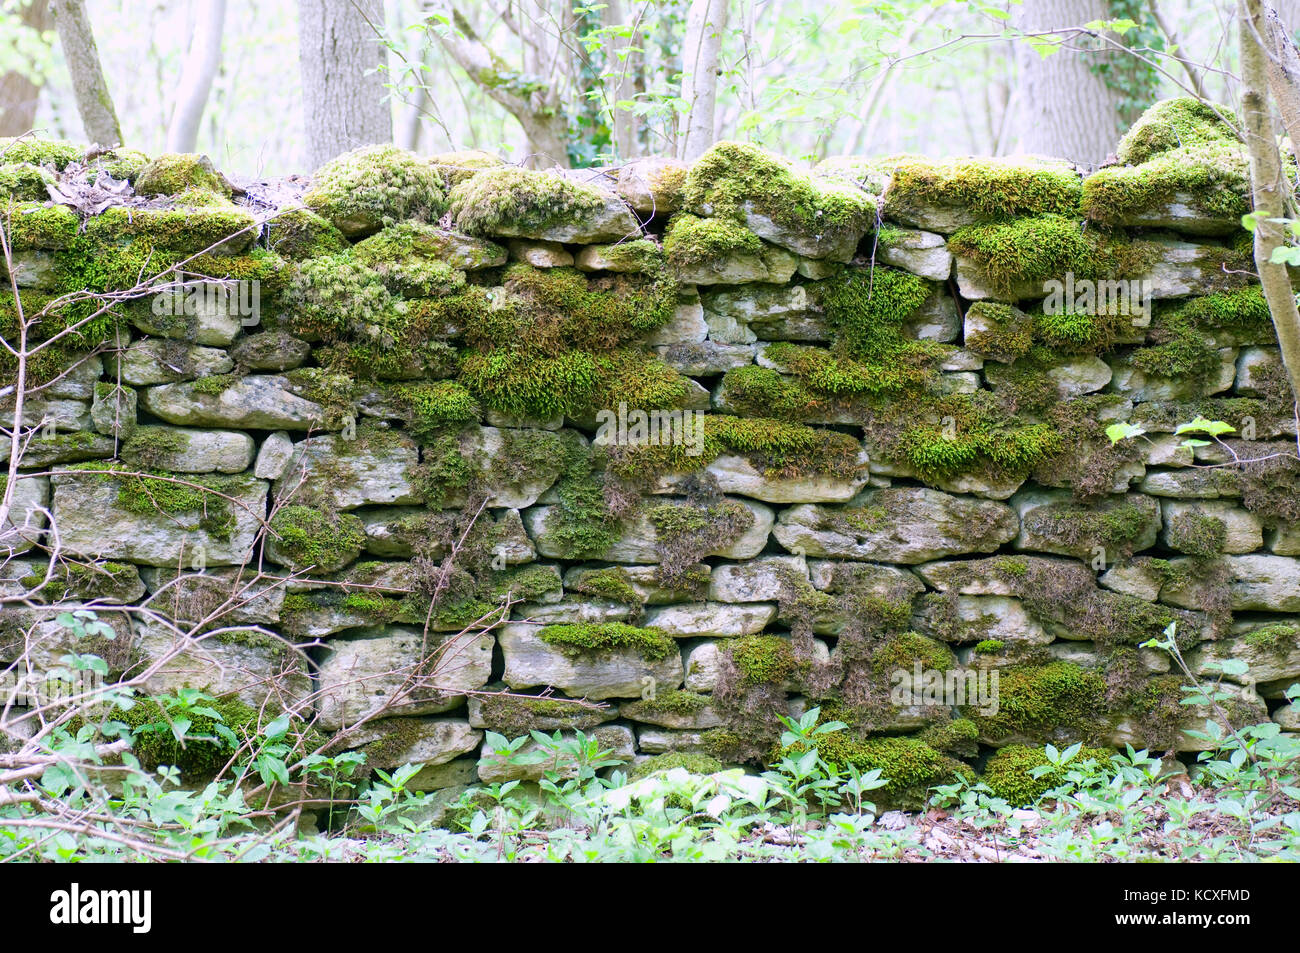 Woodland dry stone wall covered in mosses Stock Photo